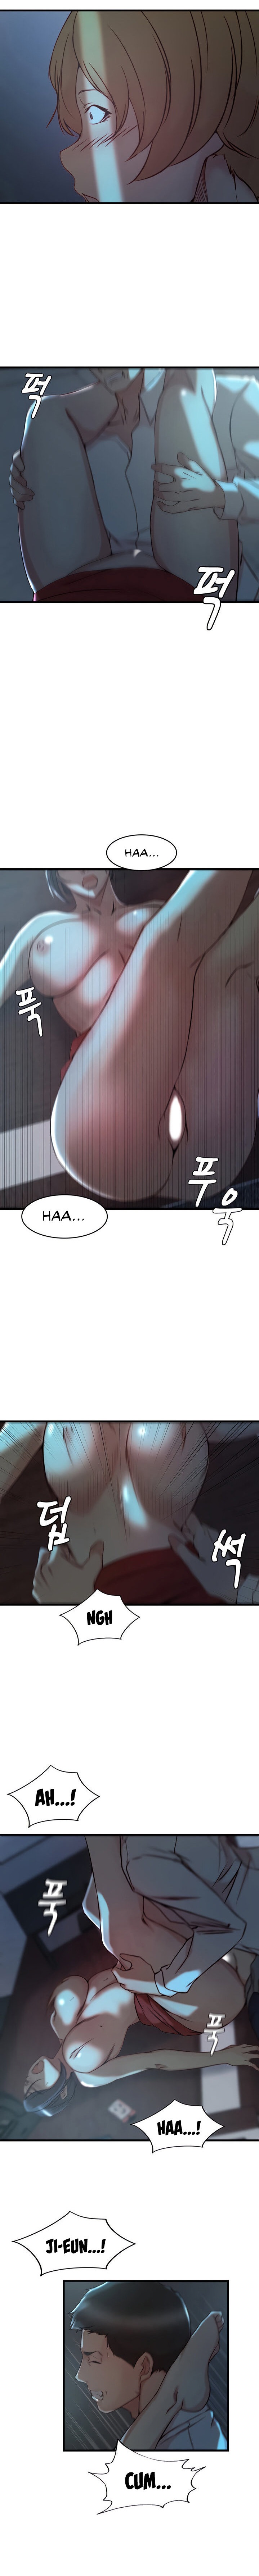 Sister-in-Law Manhwa - Chapter 34 Page 6